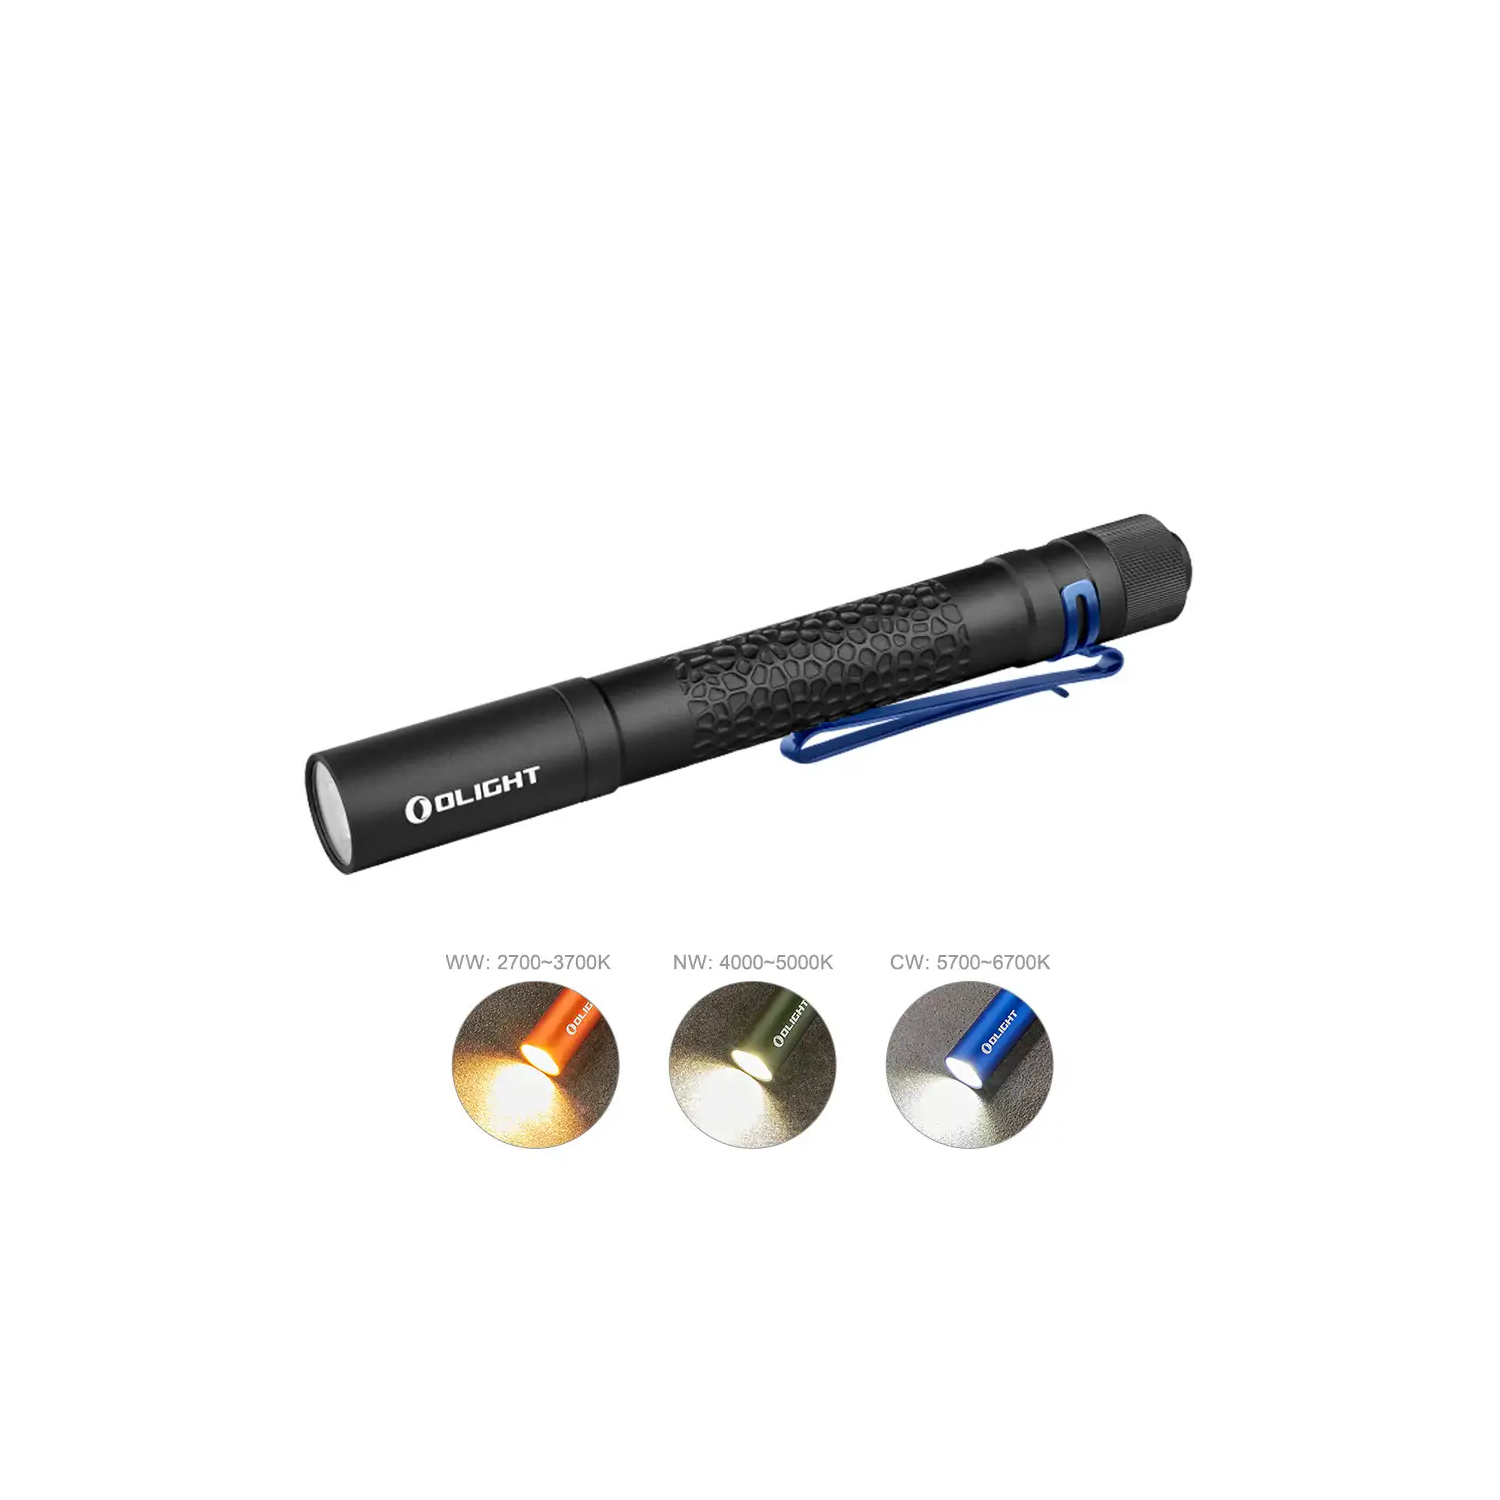 i5T Plus EDC Flashlight with Pebble Etching and three LED color temperatures are available including cool, neutral, and warm white.